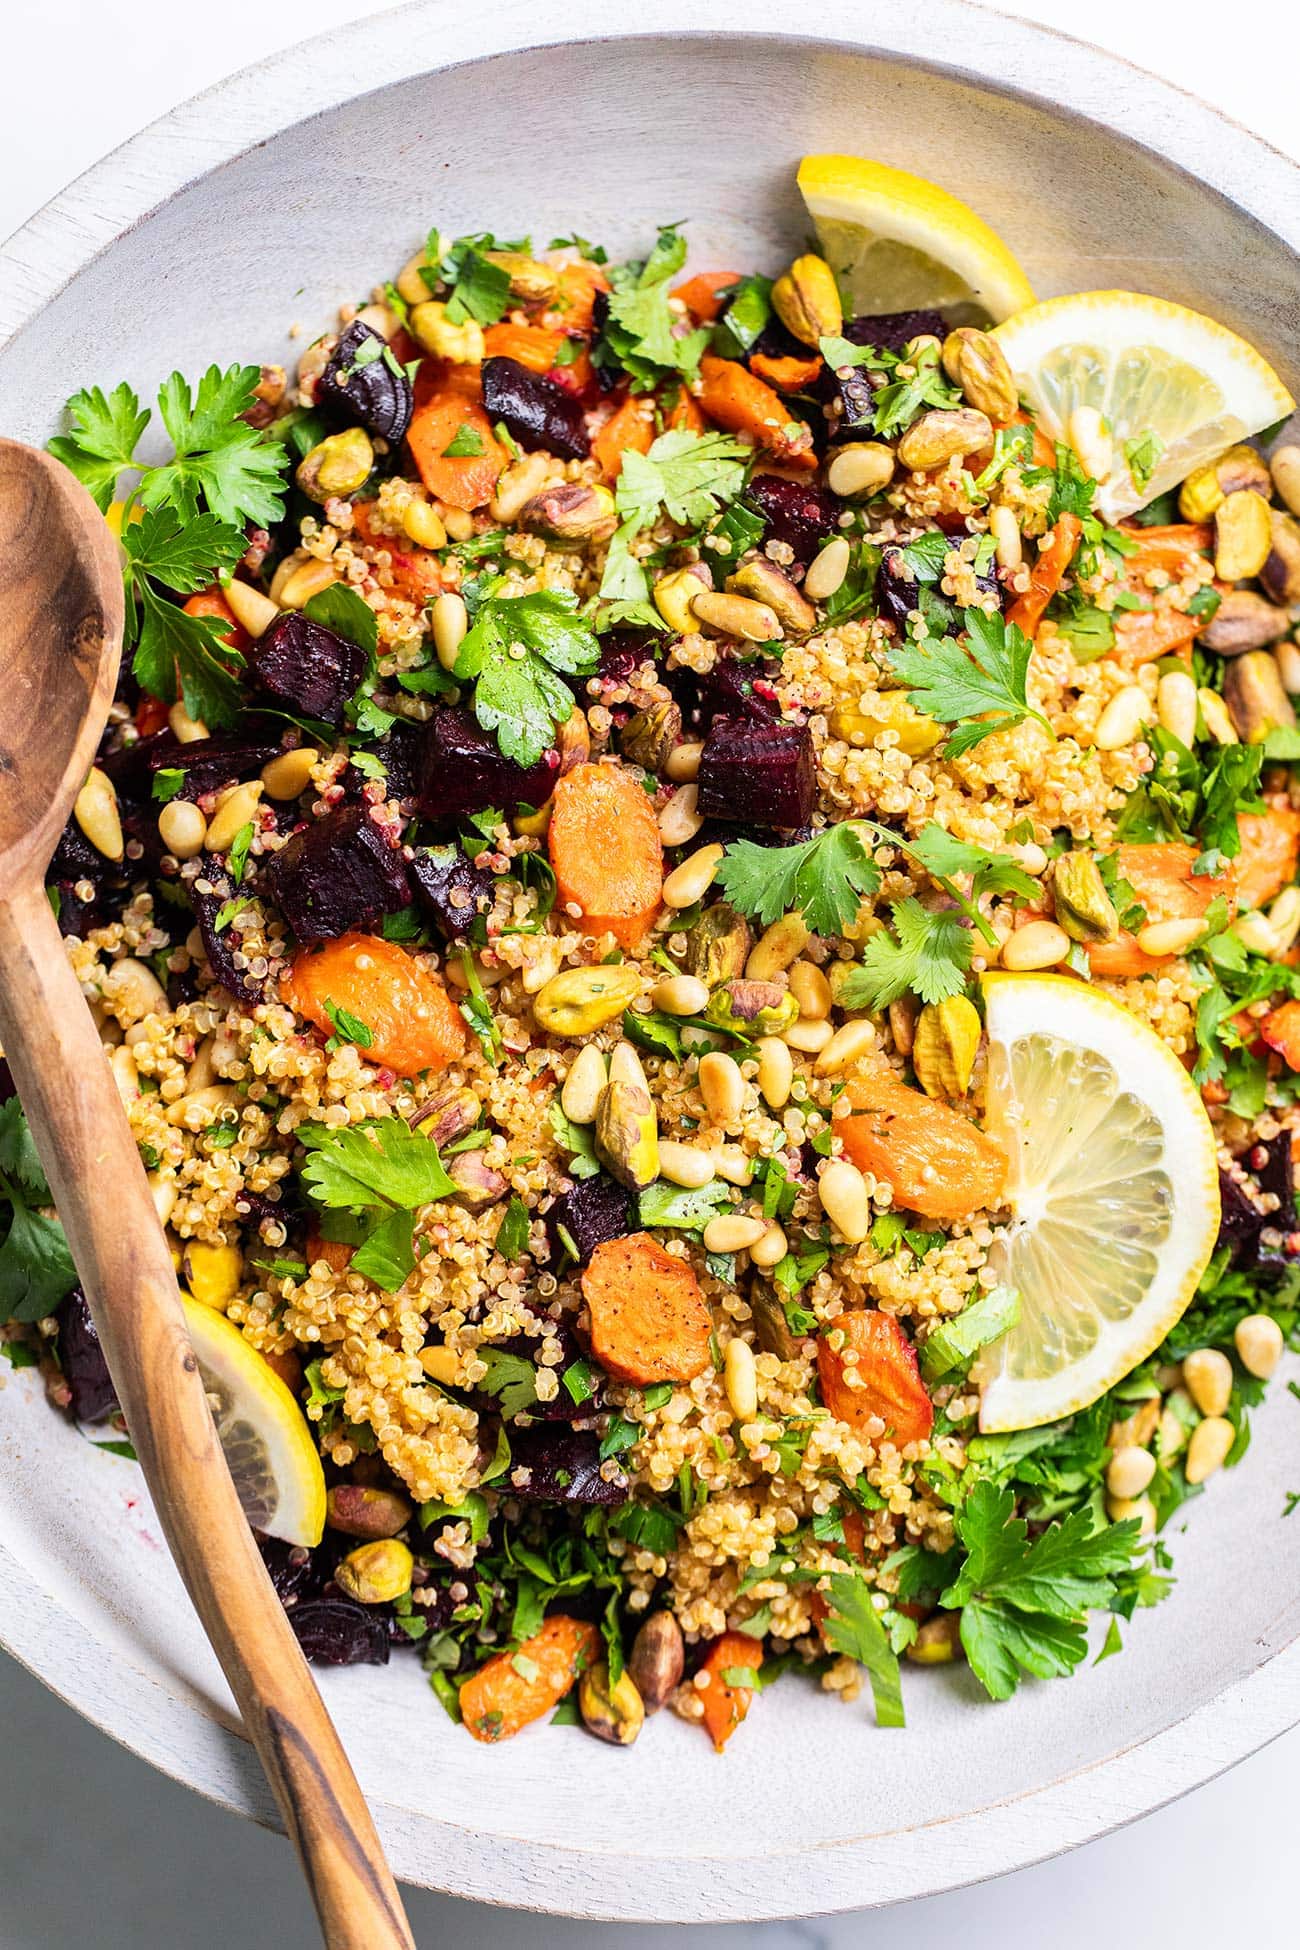 A close up look at a beet quinoa salad with roasted carrots topped with pistachios and pine nuts.